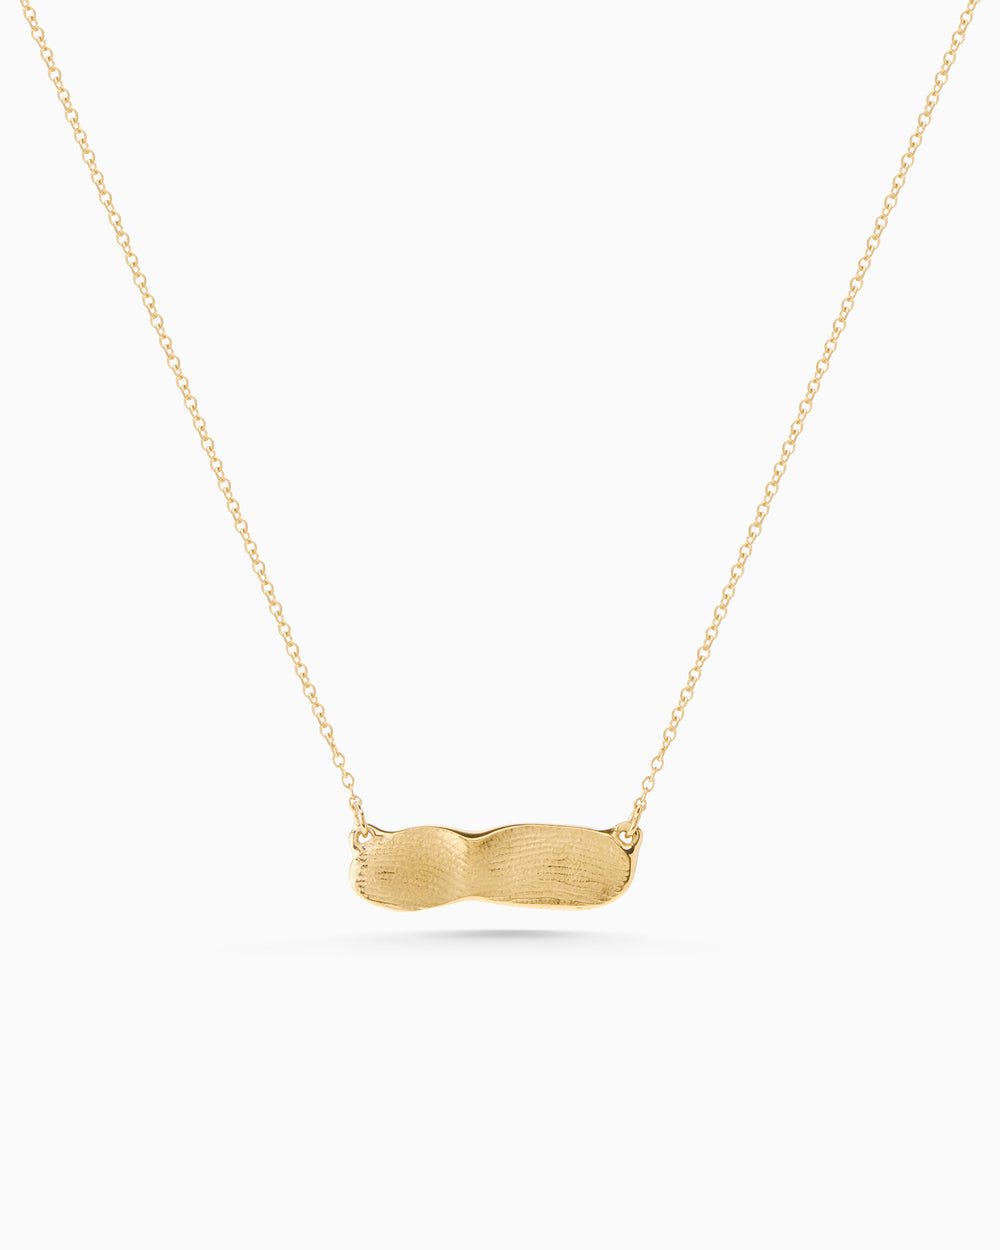 Impression Bar Necklace | Yellow Gold